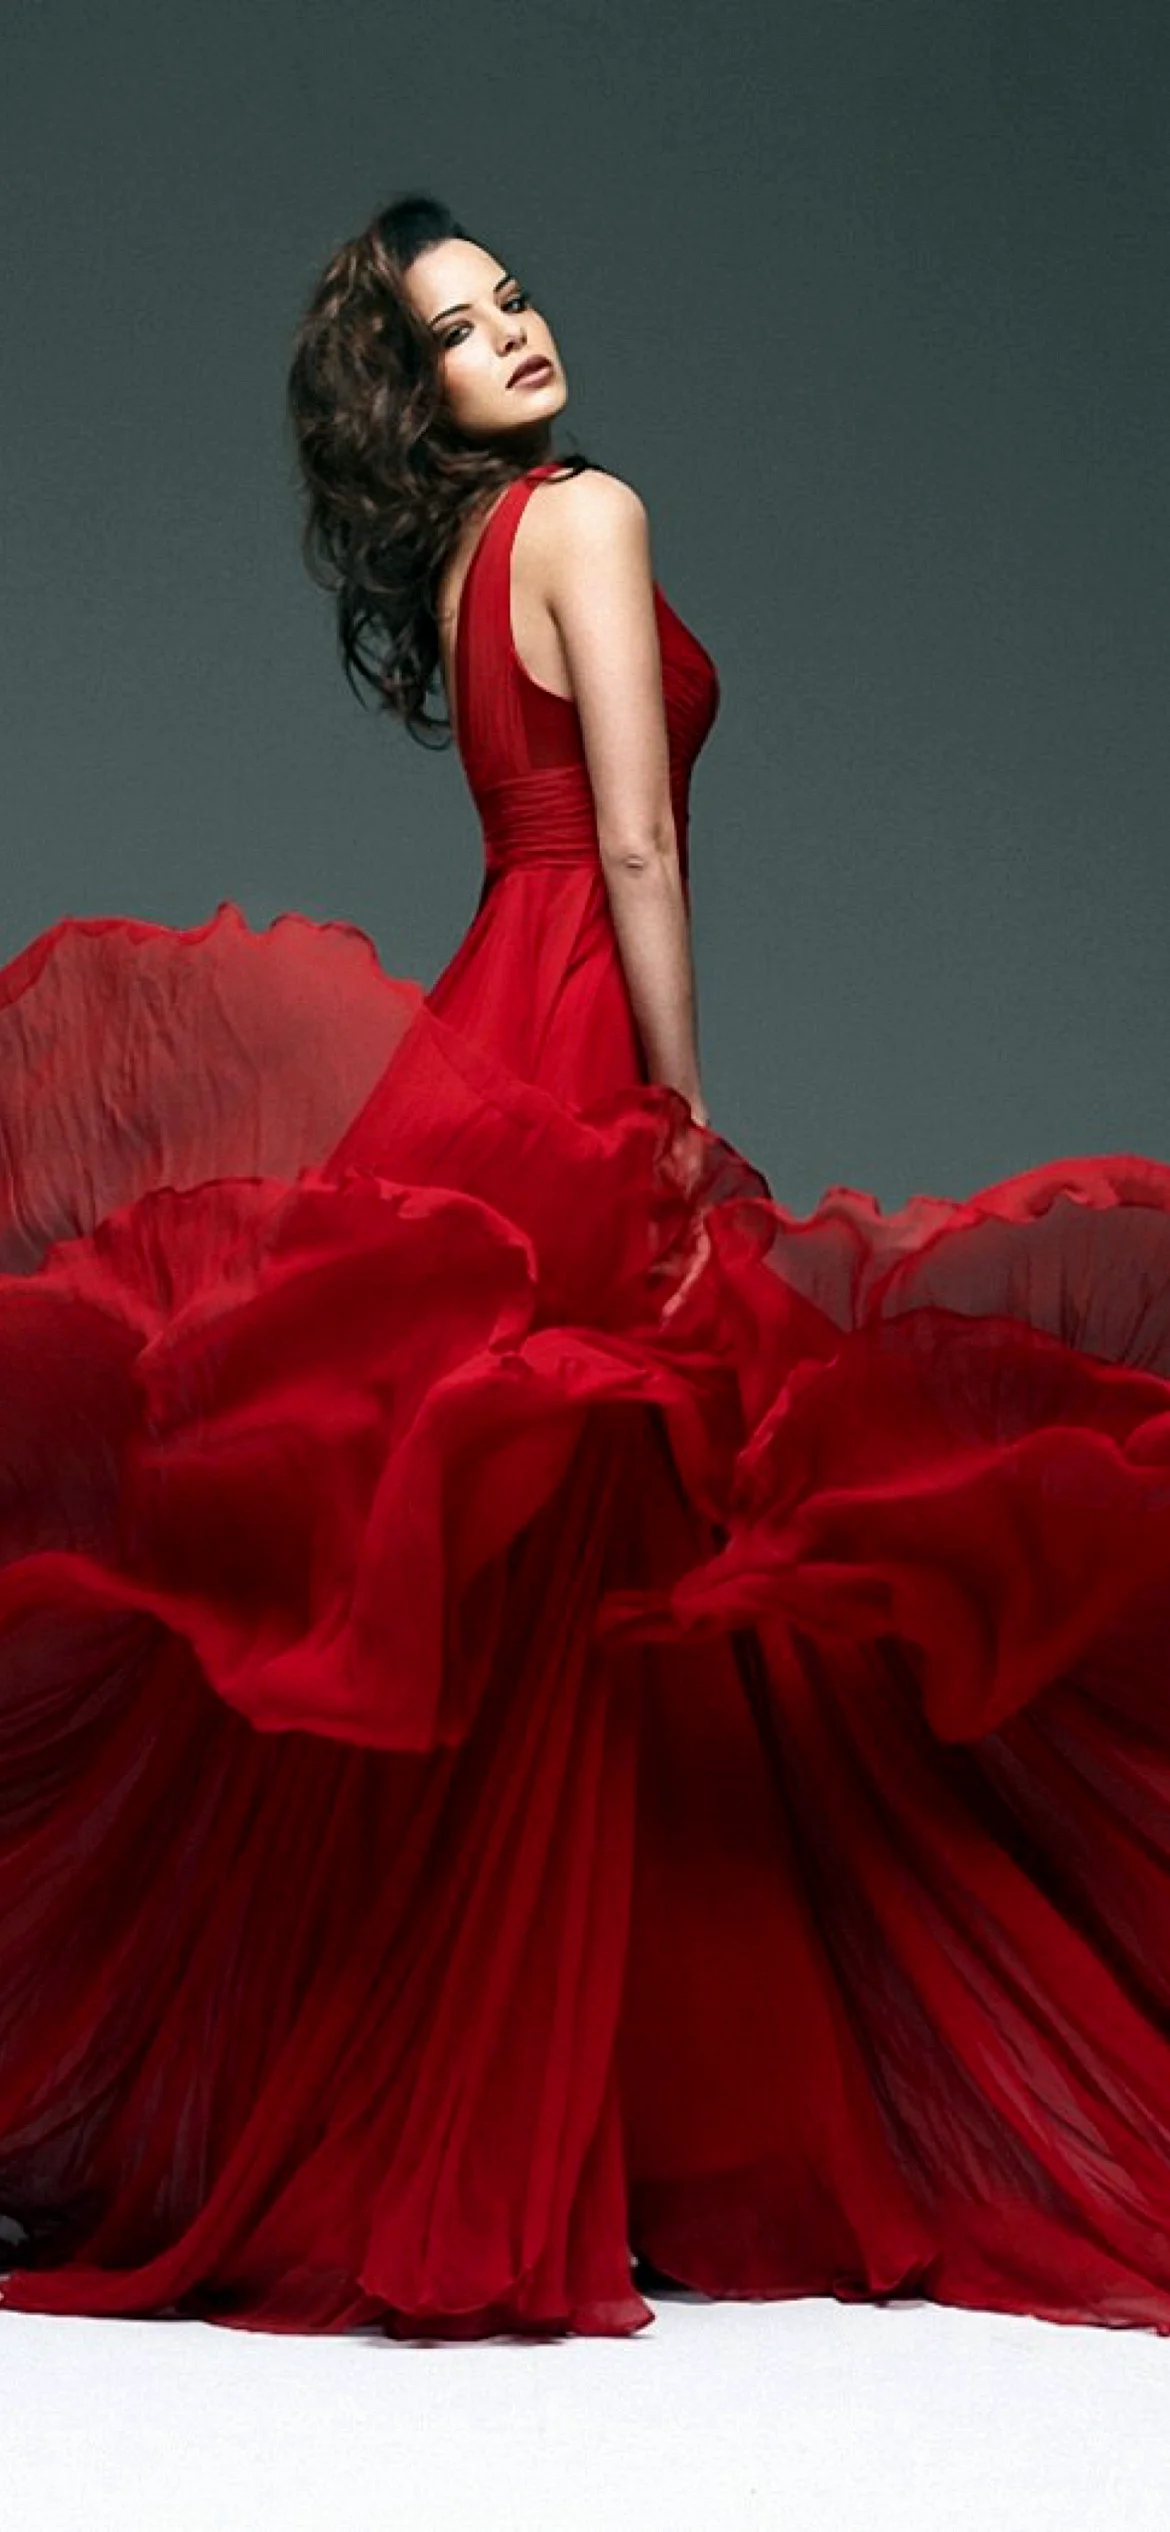 Red Dress Wallpaper for iPhone 13 Pro